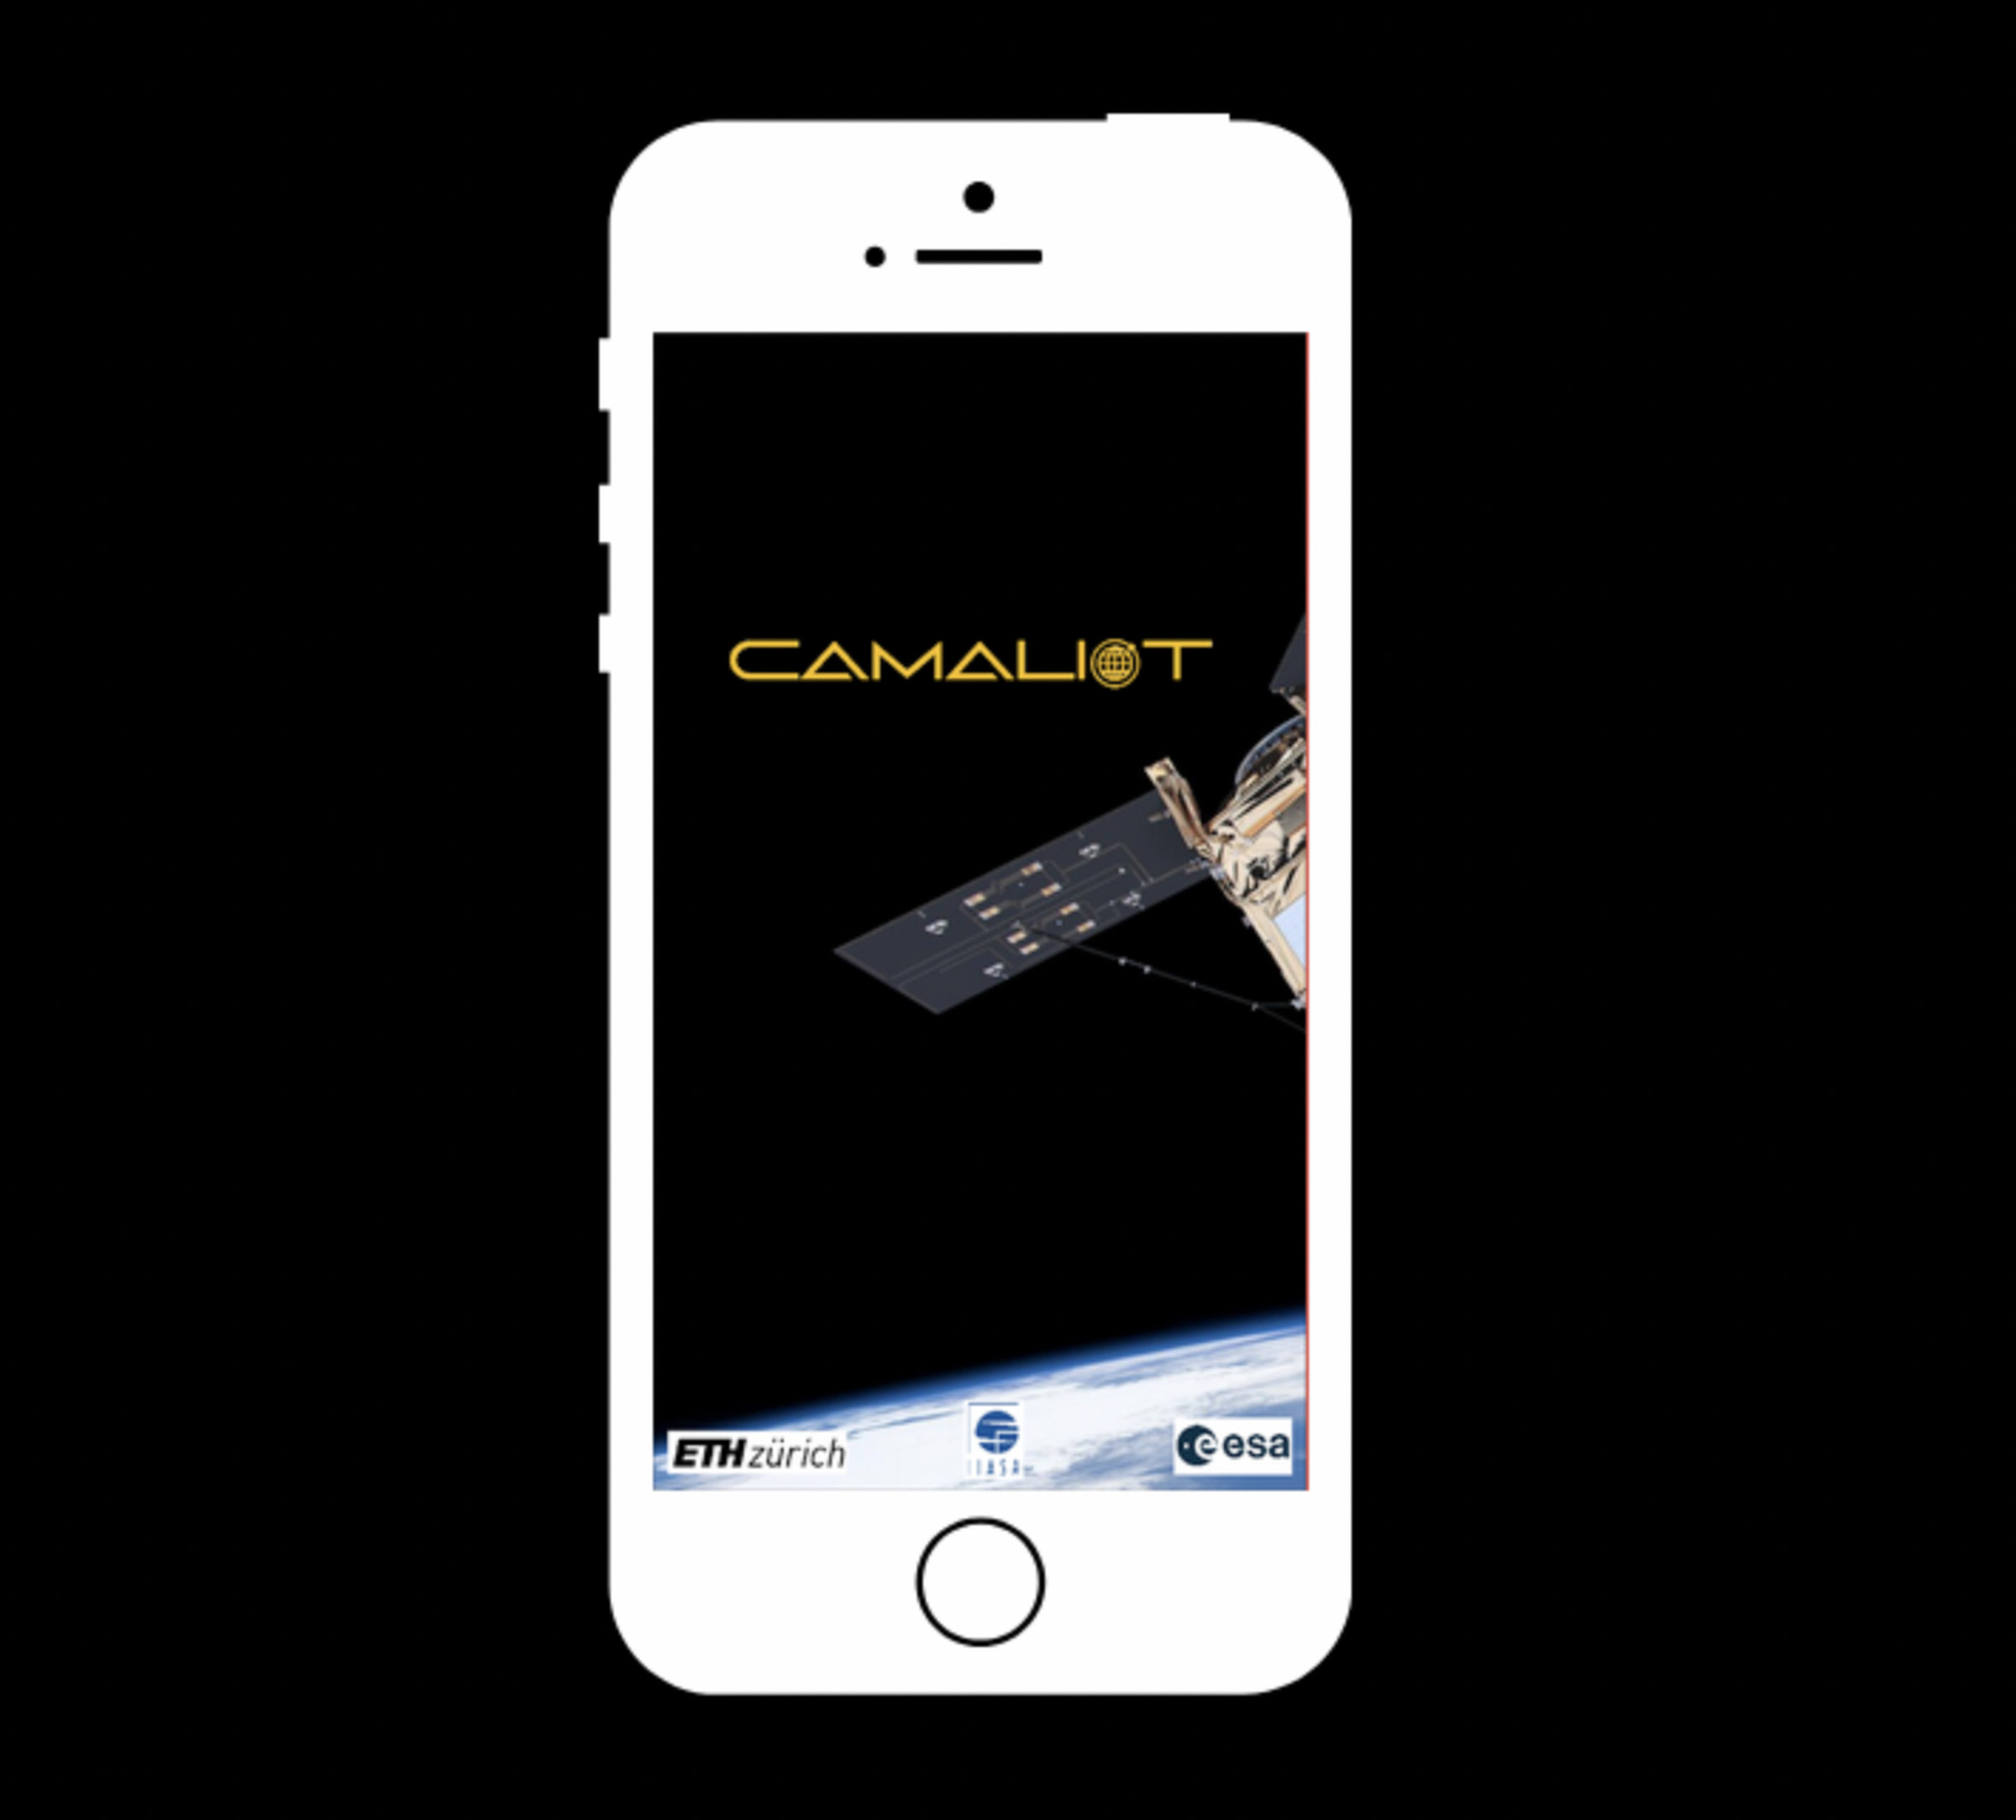 Camaliot is available only for Android users